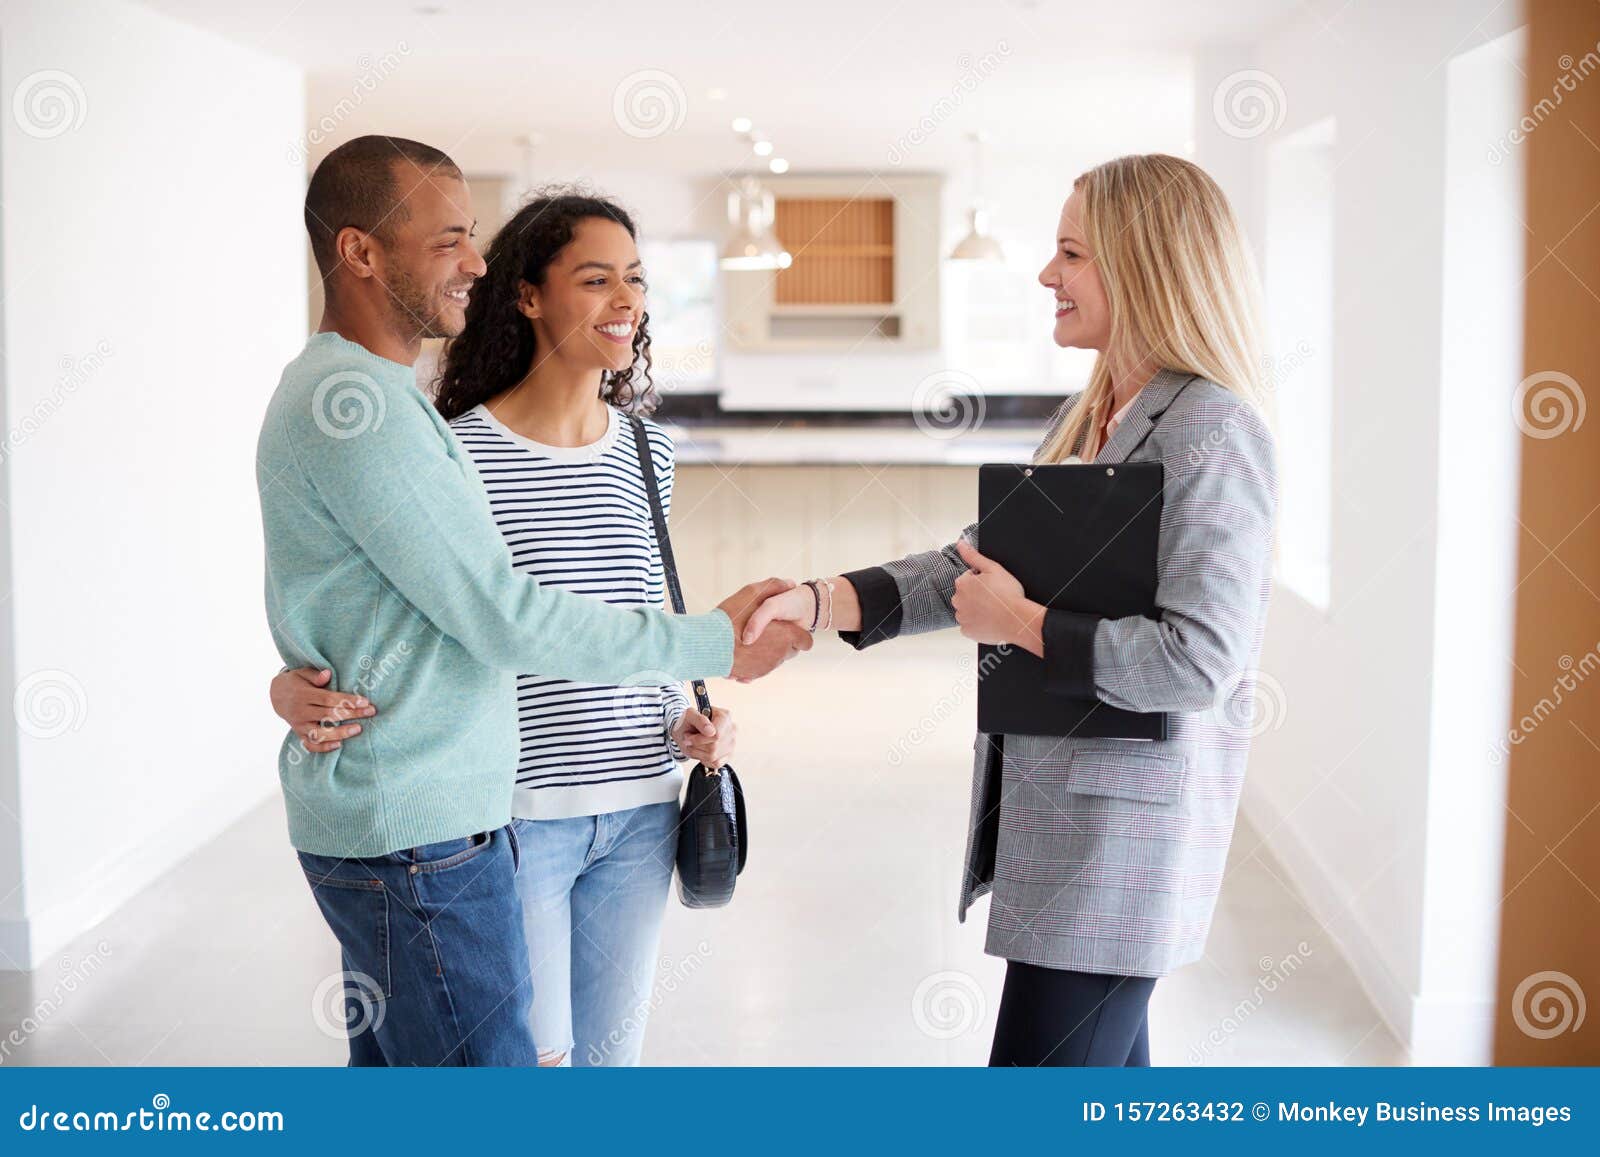 female realtor shaking hands with couple interested in buying house